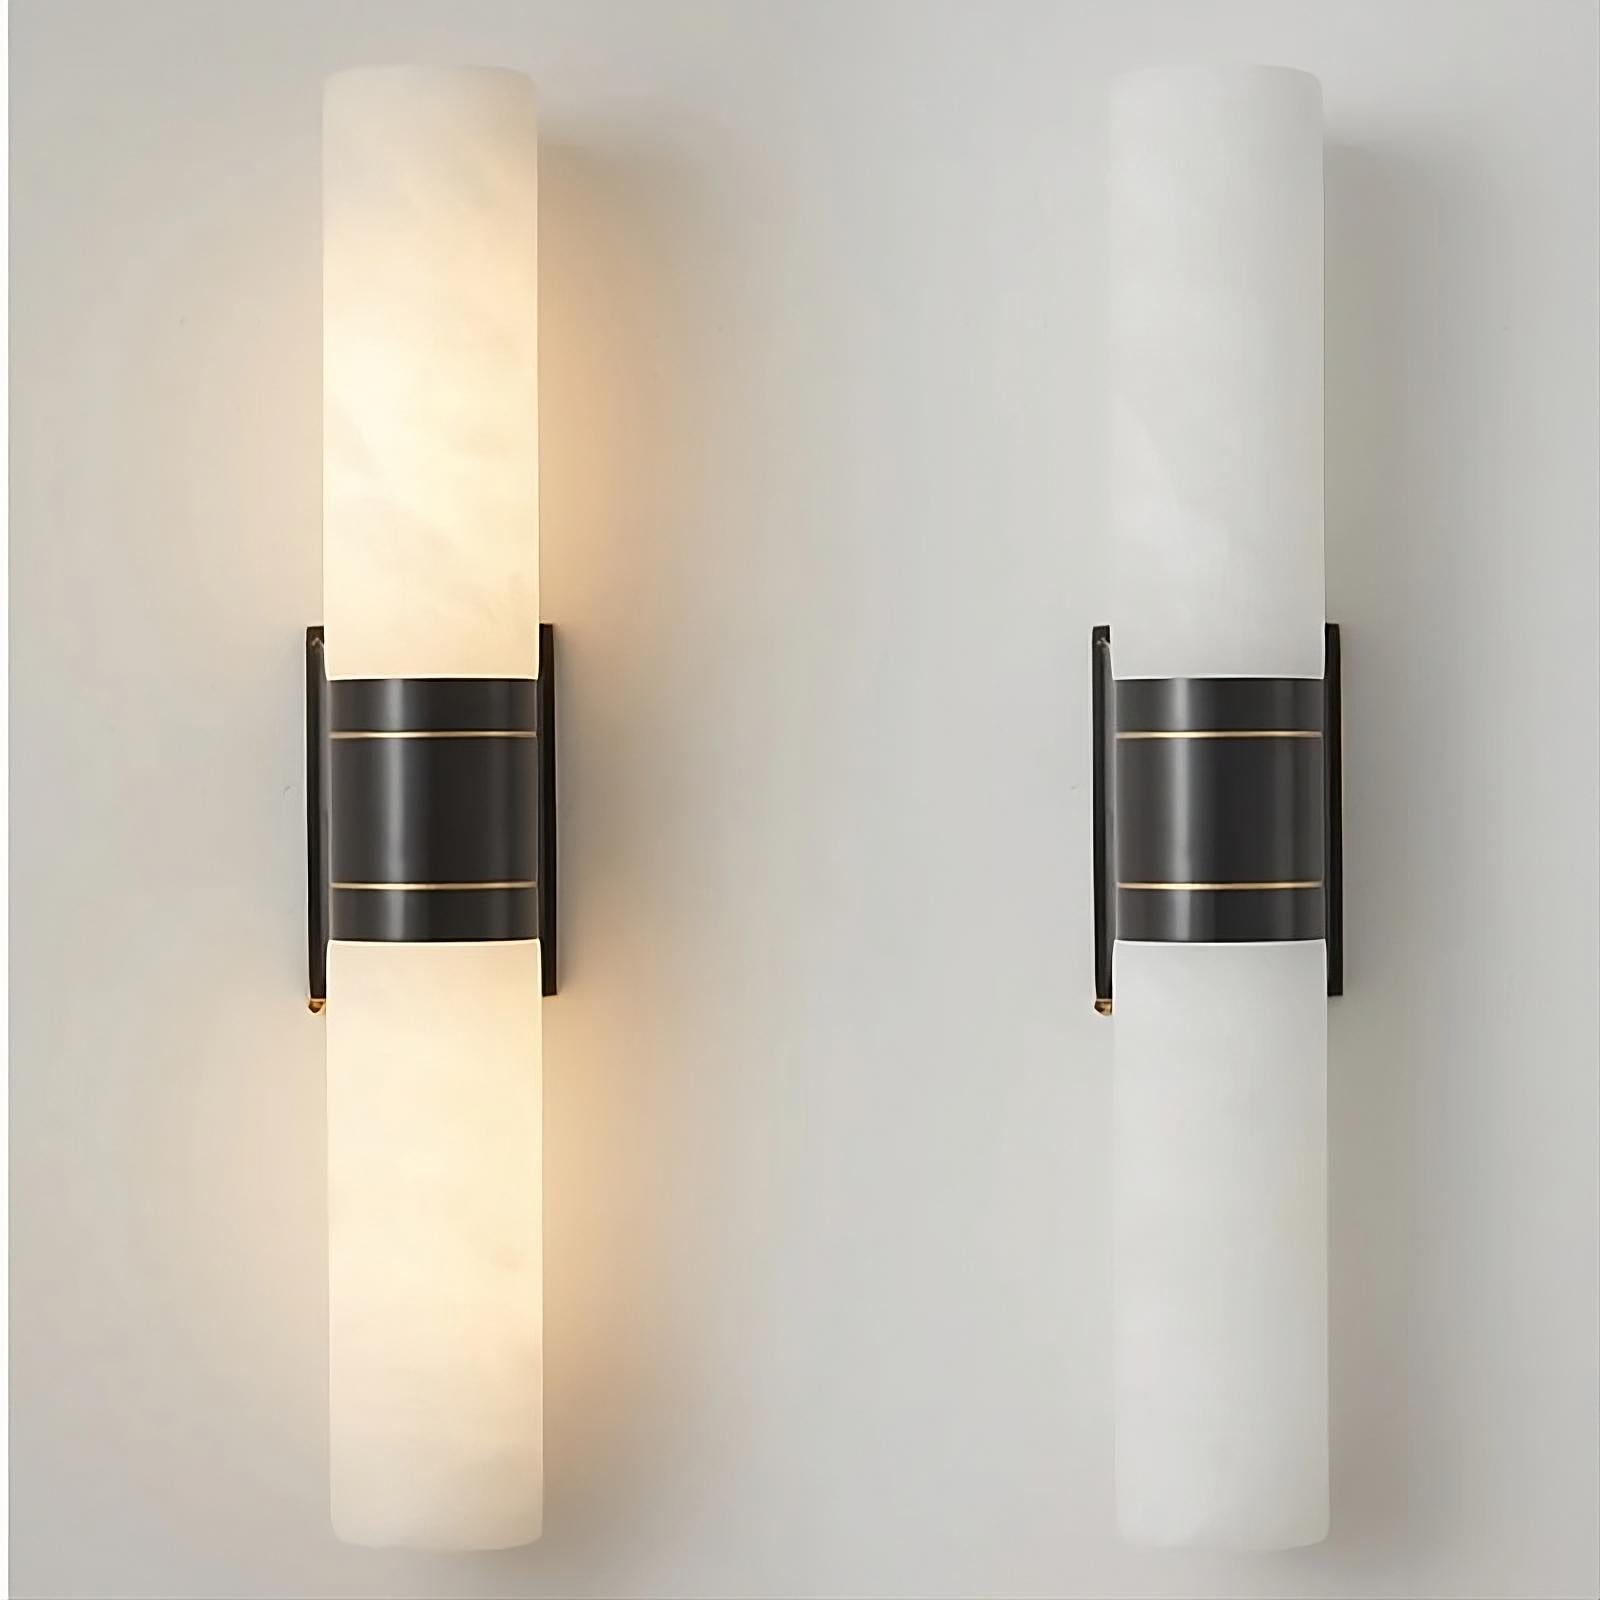 A pair of Natural Marble Indoor Wall Sconce Lights by Morsale.com with cylindrical white glass shades are shown. Both sconces, featuring a central black metal bracket and unique texture, add elegance to the plain, light-colored wall. The left sconce is illuminated, emitting a warm light, while the right sconce remains turned off.